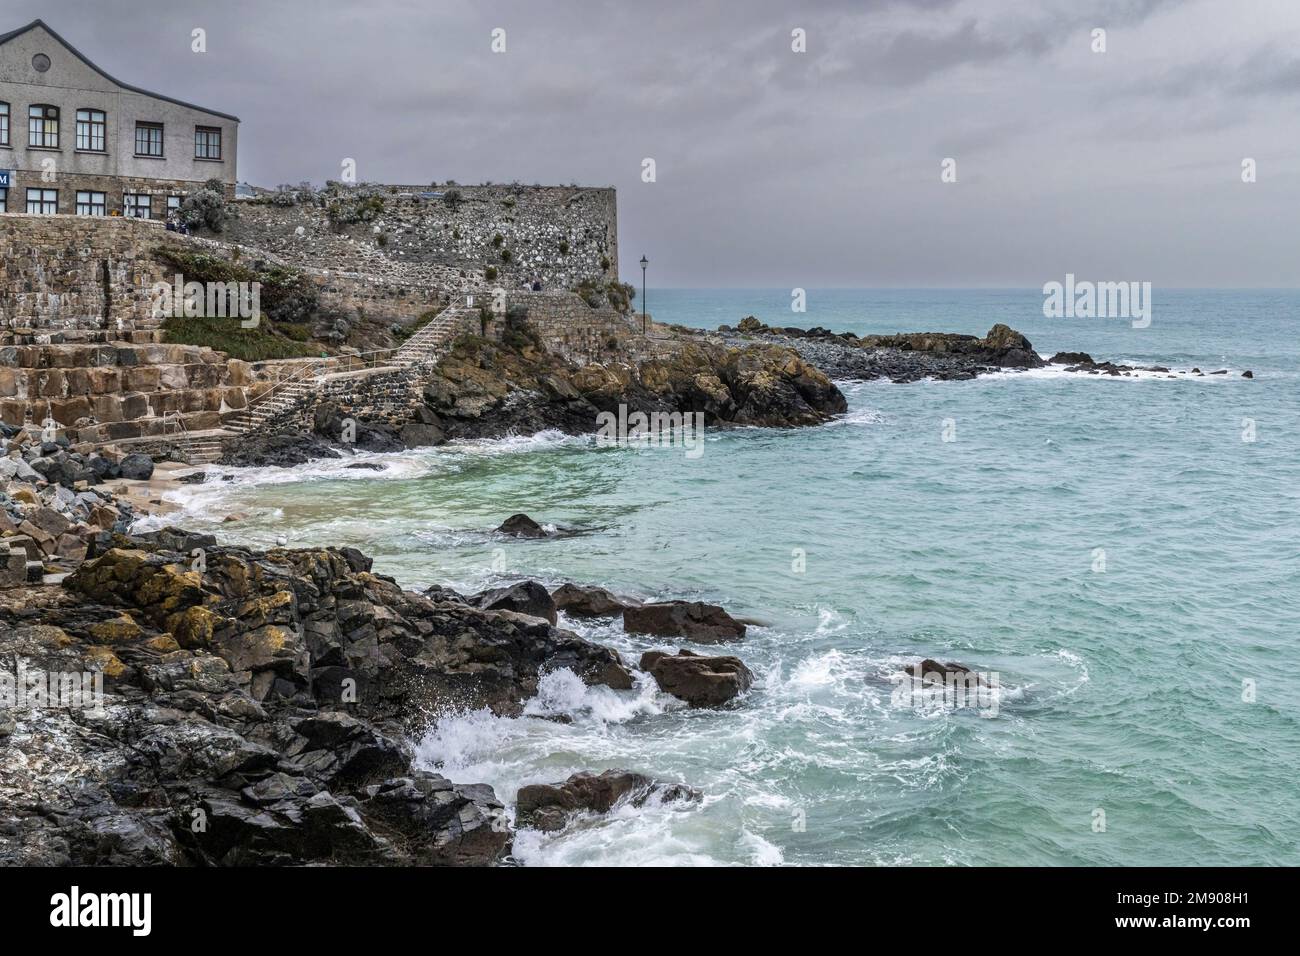 UK weather. High tide at Bamaluz Beach on rainy chilly miserable day in the historic seaside town of St Ives in Cornwall in England in the UK. Stock Photo